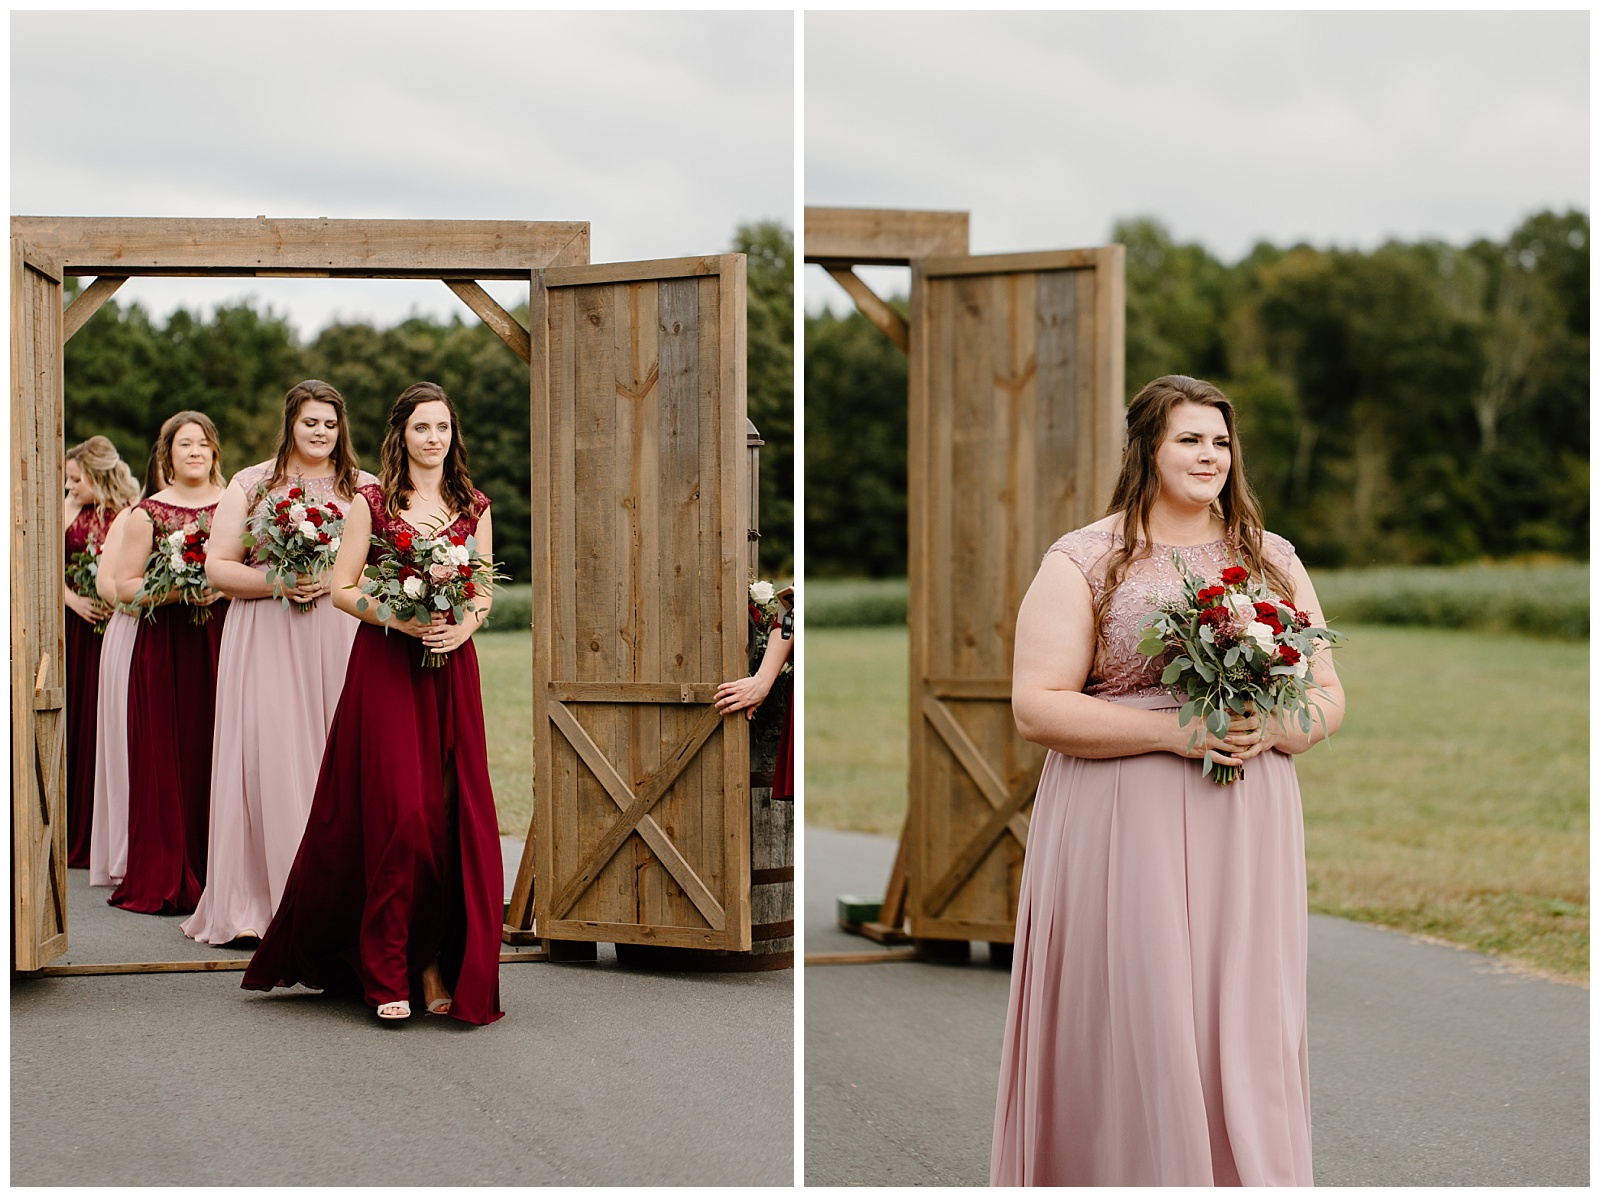 Bridemaids in different shades of pink and bordeaux floor length dresses walk down the aisle during wedding ceremony.